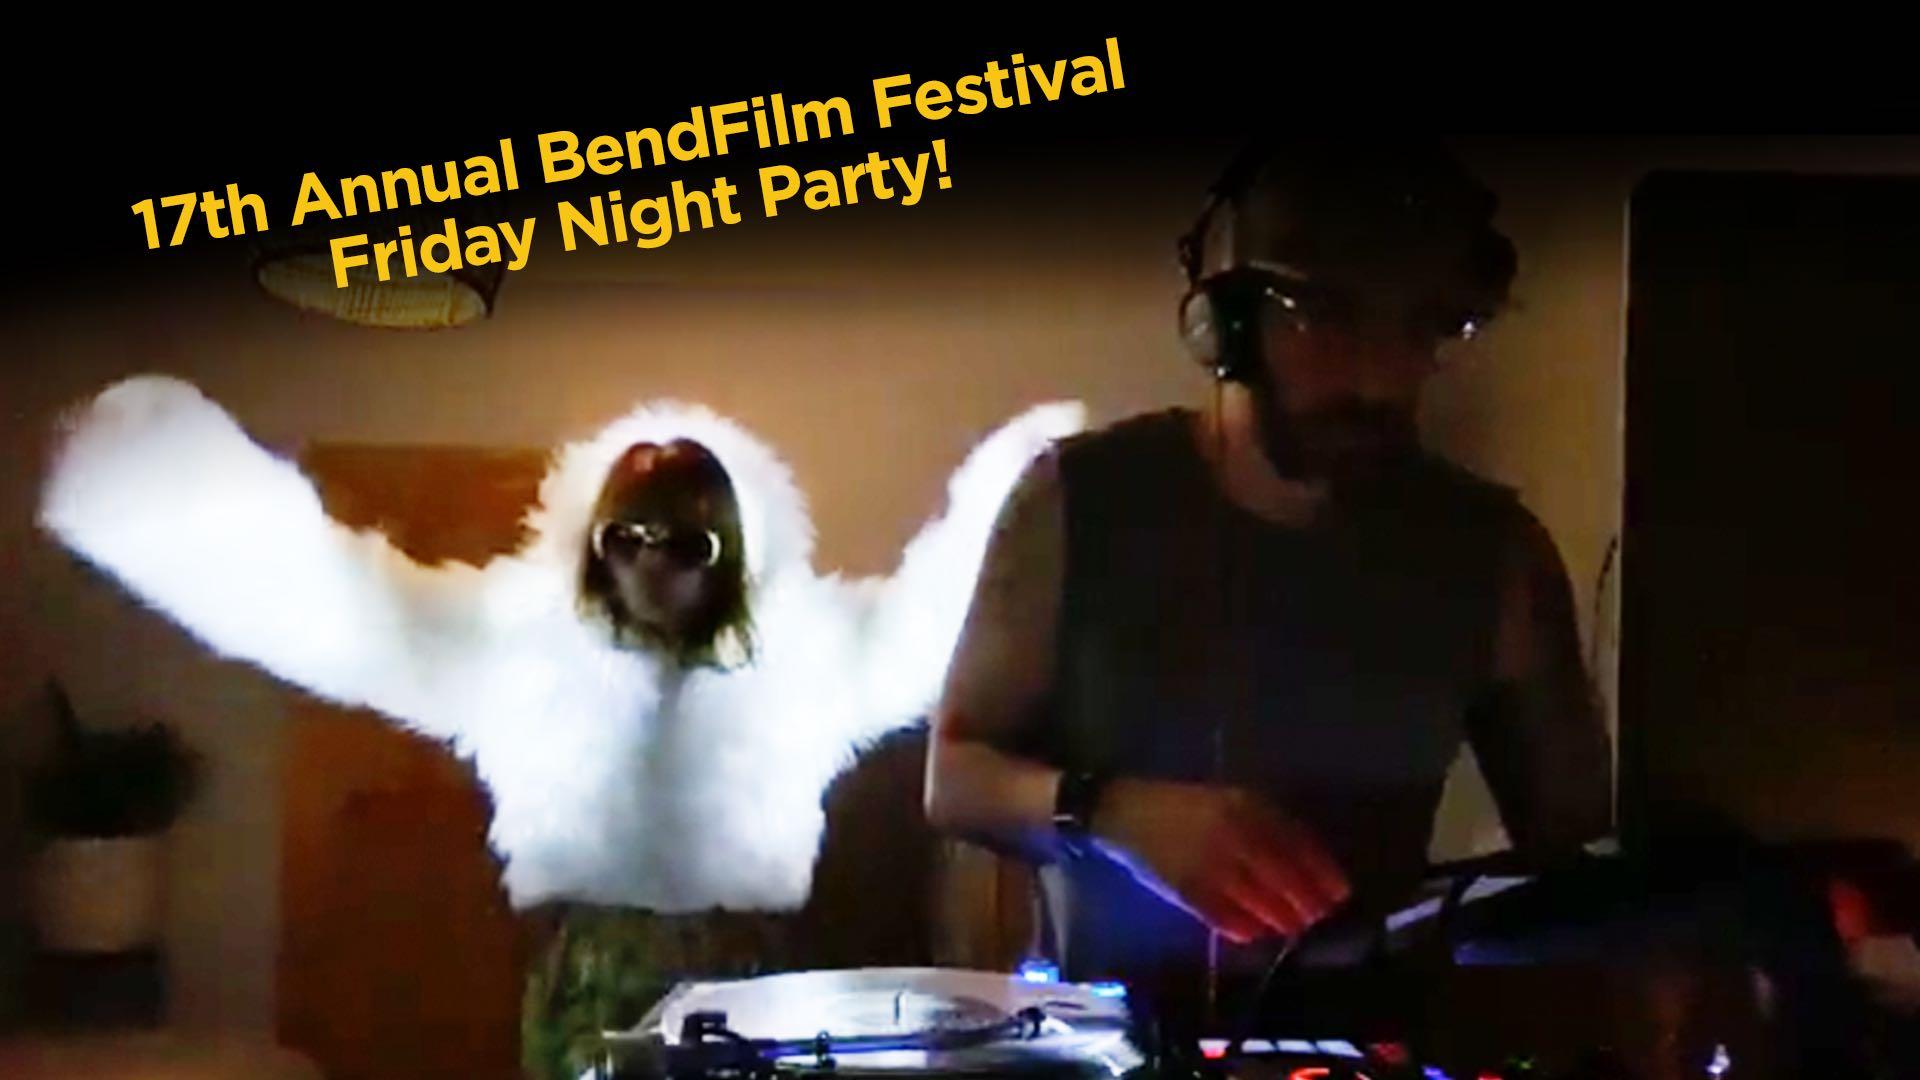 The BendFilm Festival Virtual Friday Night Party!